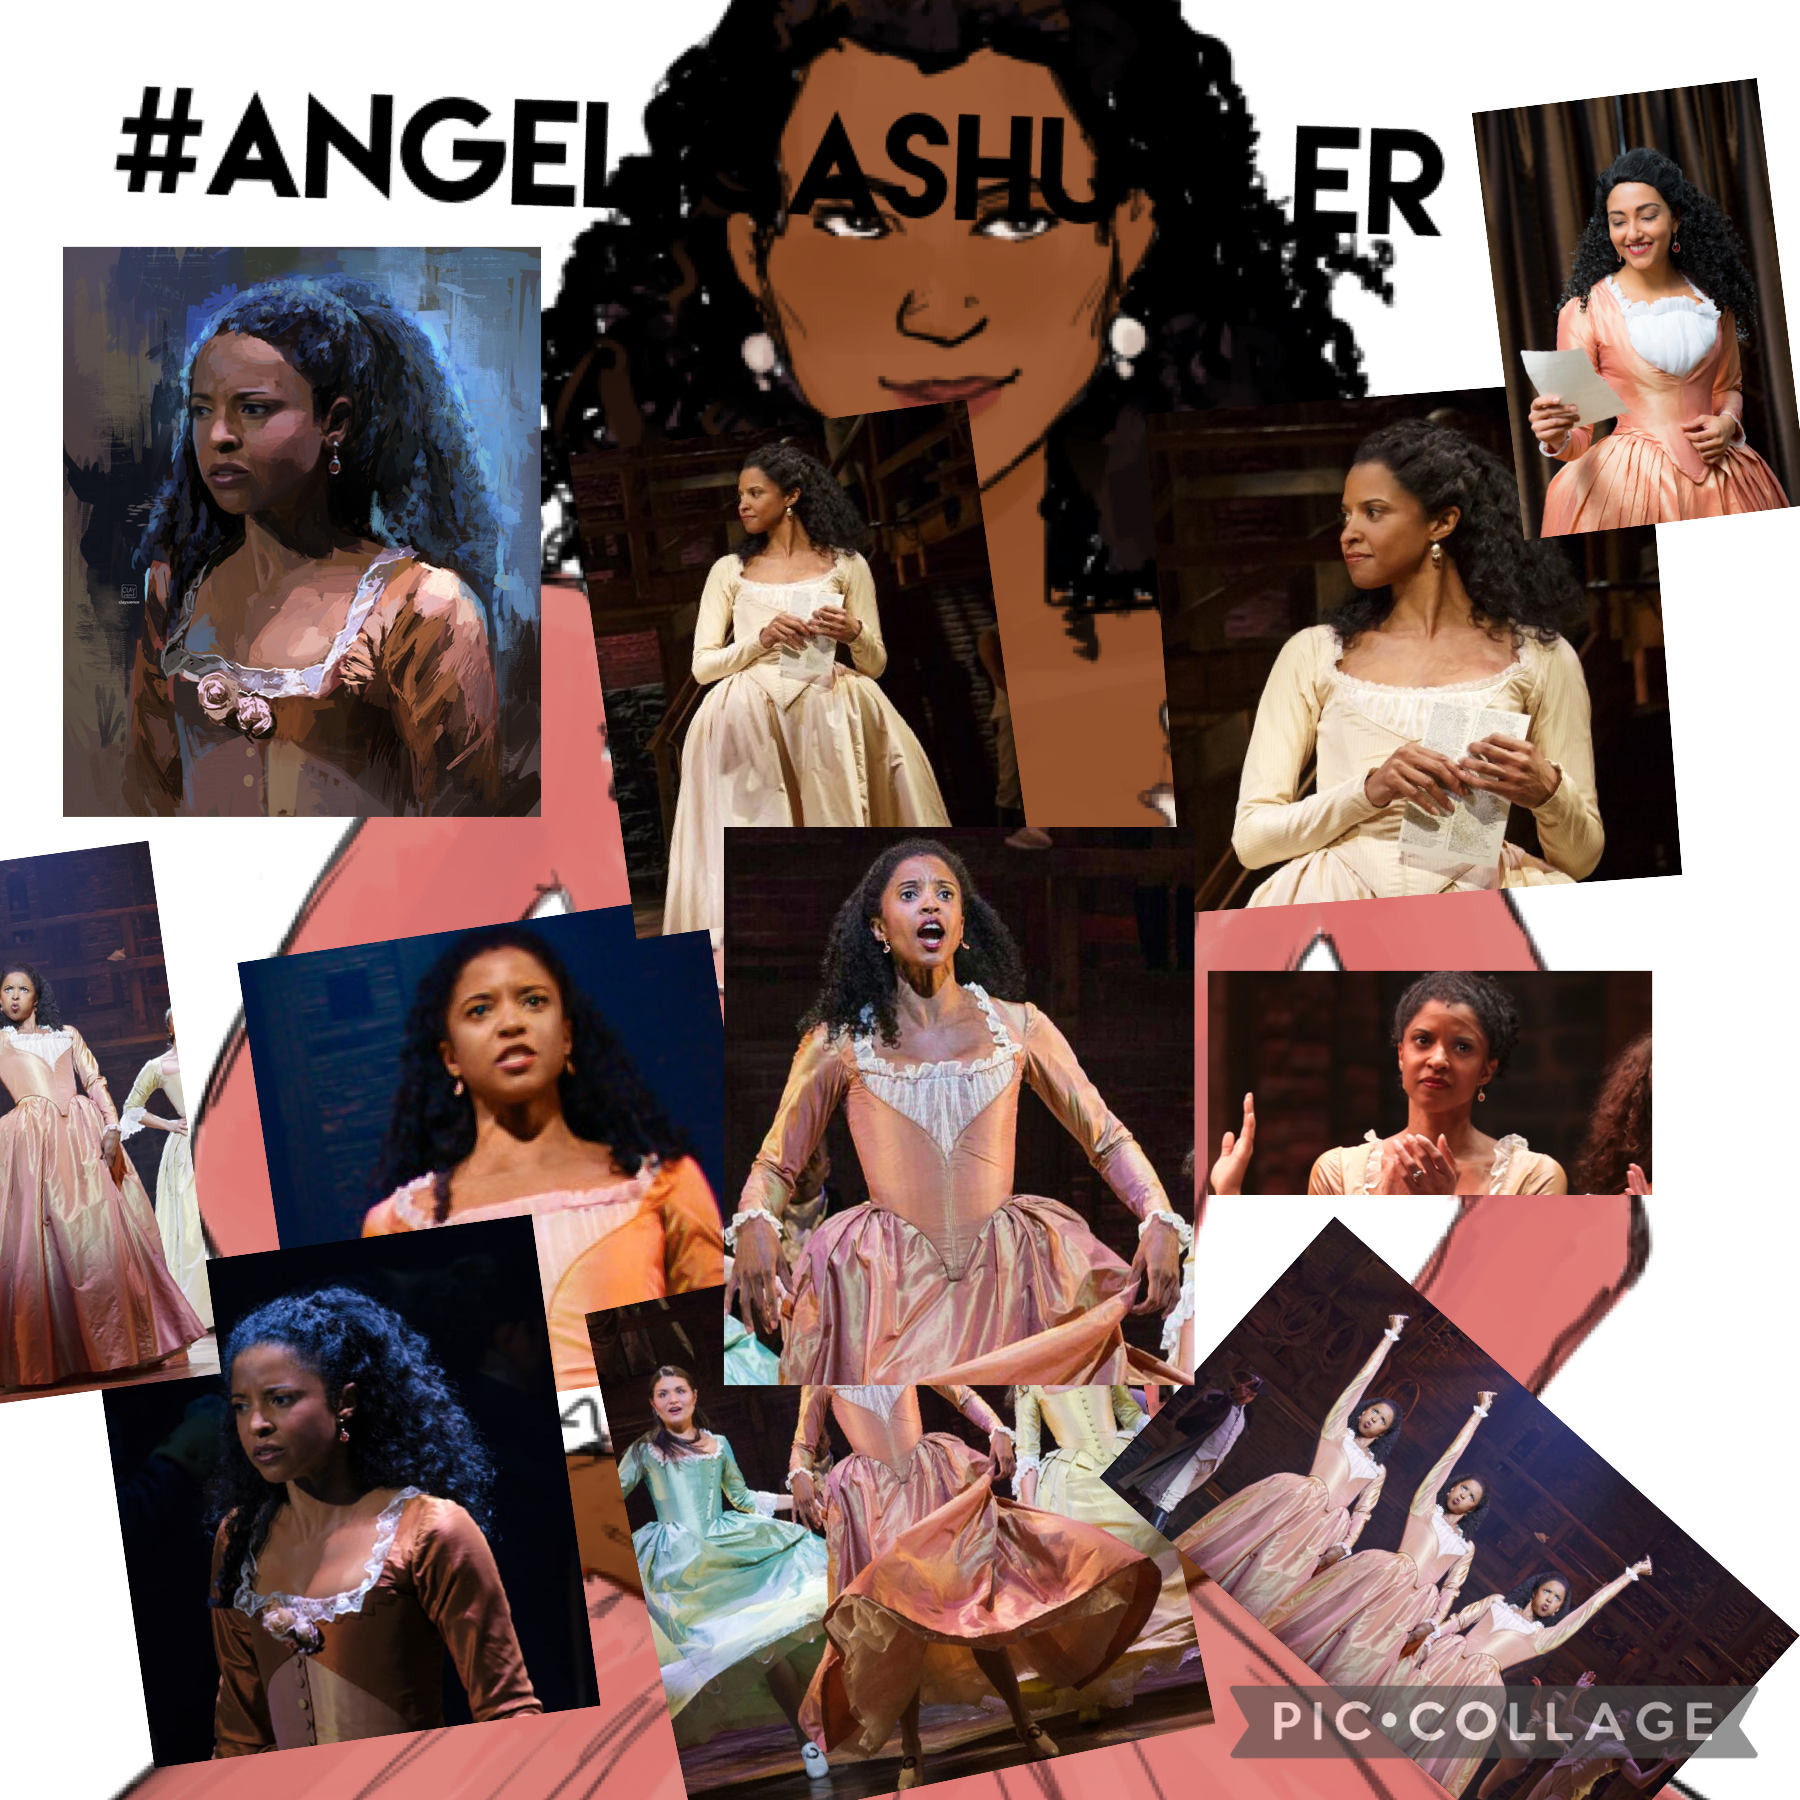 #angelicashuyler

Angelica Schuyler from Hamilton! Played by Renee Elise Goldsberry!